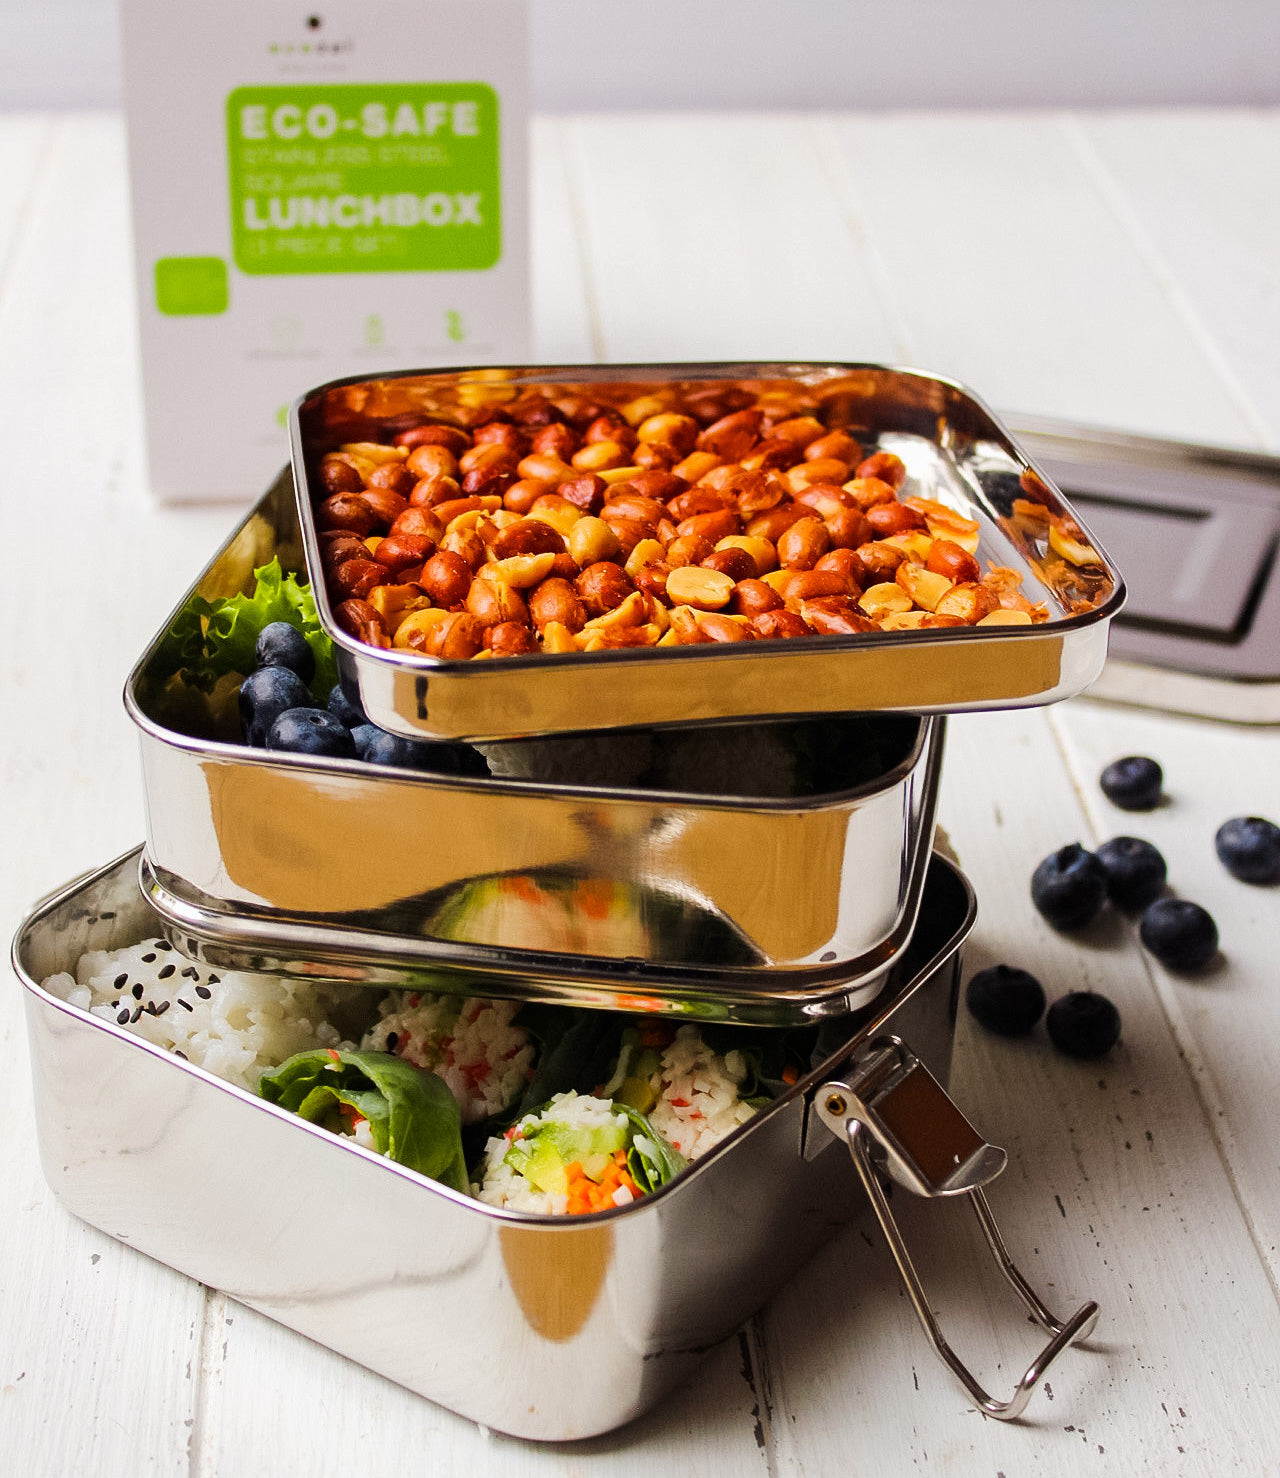 Stainless Steel Eco Lunch Box, 2 Tier Square with Additional Tray, 40 Oz or 1200 ml freeshipping - ecozoi